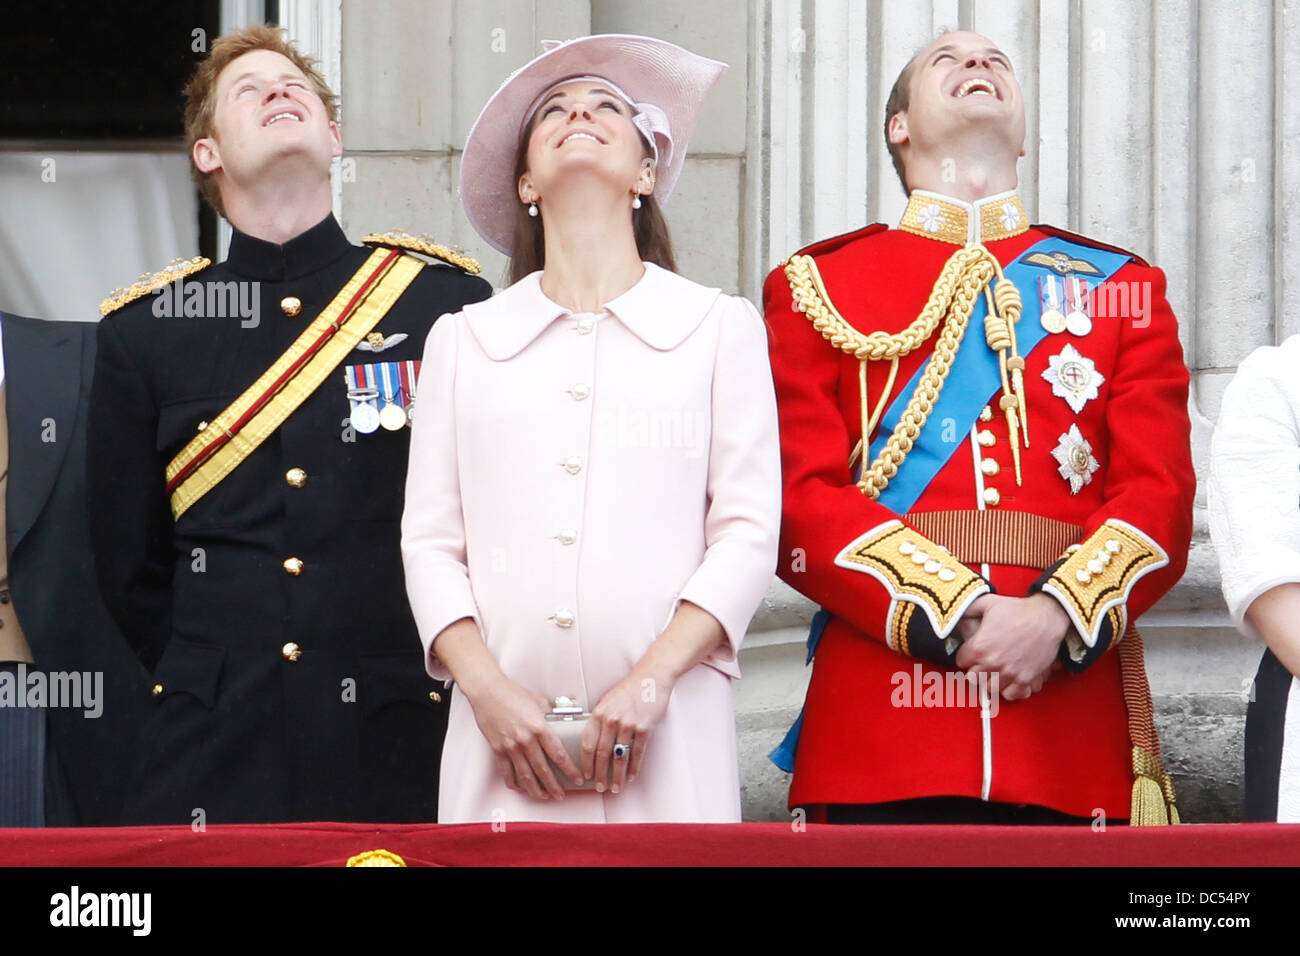 (L-R) Prince Harry, Catherine, Duchess of Cambridge and Prince William, Duke of Cambridge stand on the balcony of Buckingham Pal Stock Photo